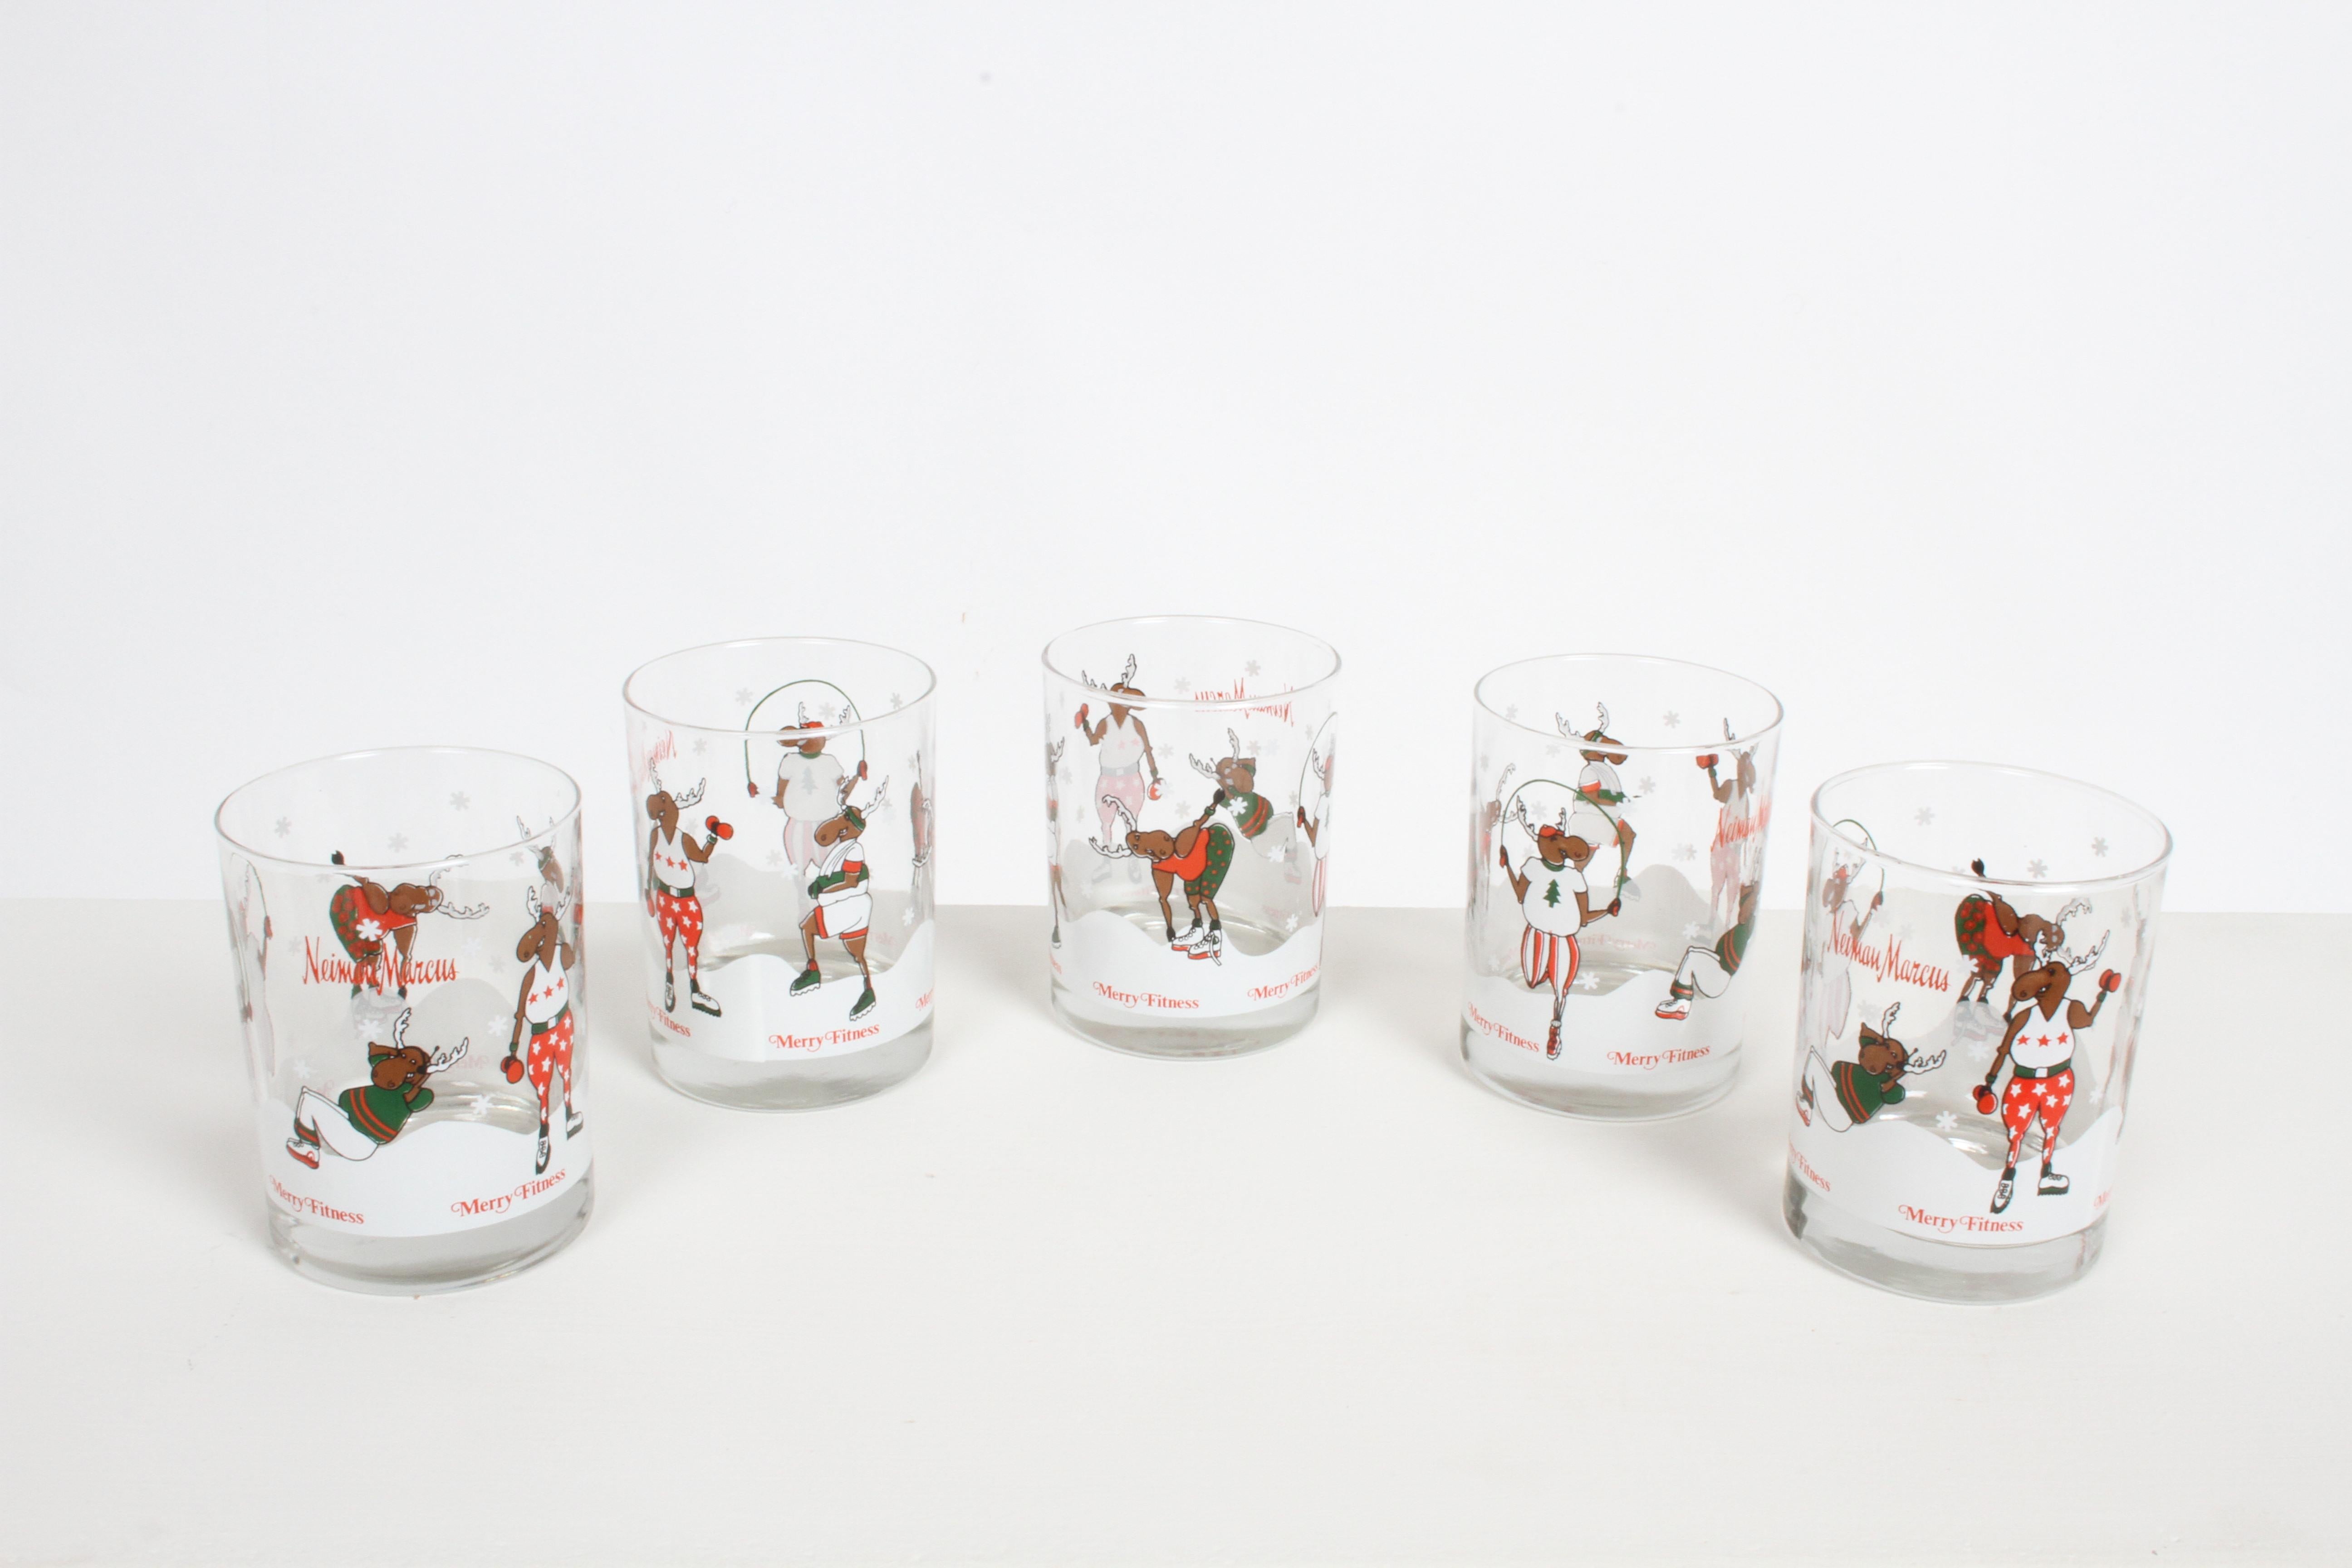 Vintage 1980s barware by Neiman Marcus, this set of five rock glasses with Holiday fitness theme of reindeer's working out, by jogging, stretching, jumping rope, lifting weights and sit ups. They appear to never have been used or very little use. No